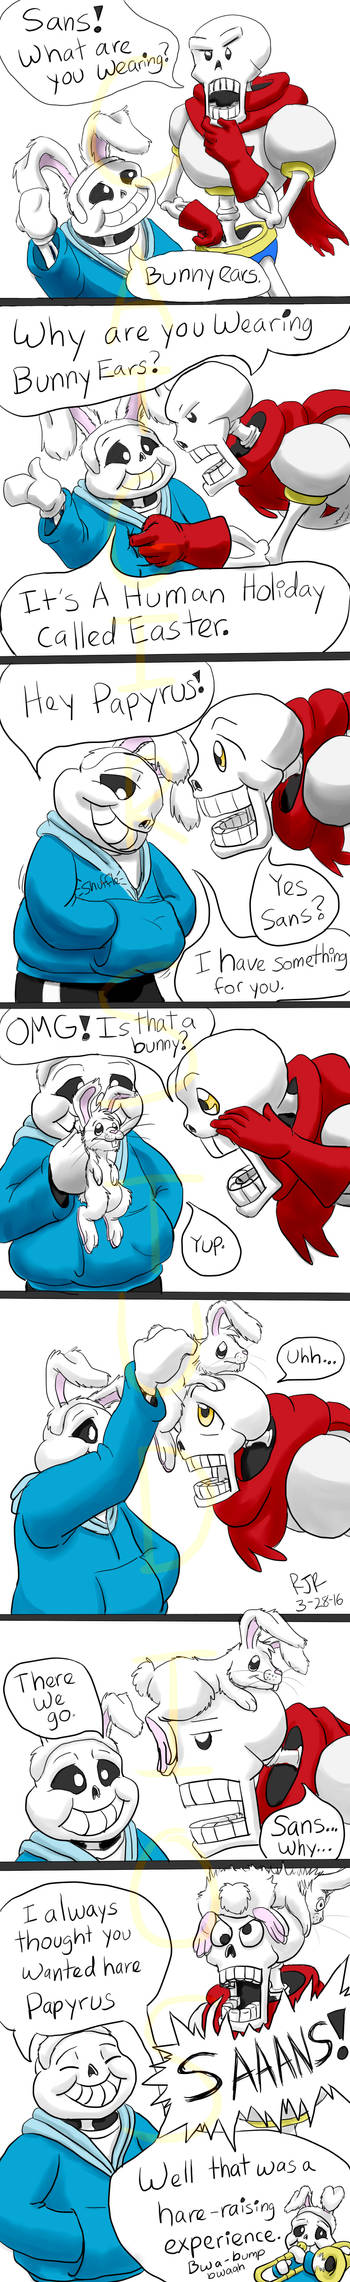 Sans and Papyrus Easter Comic